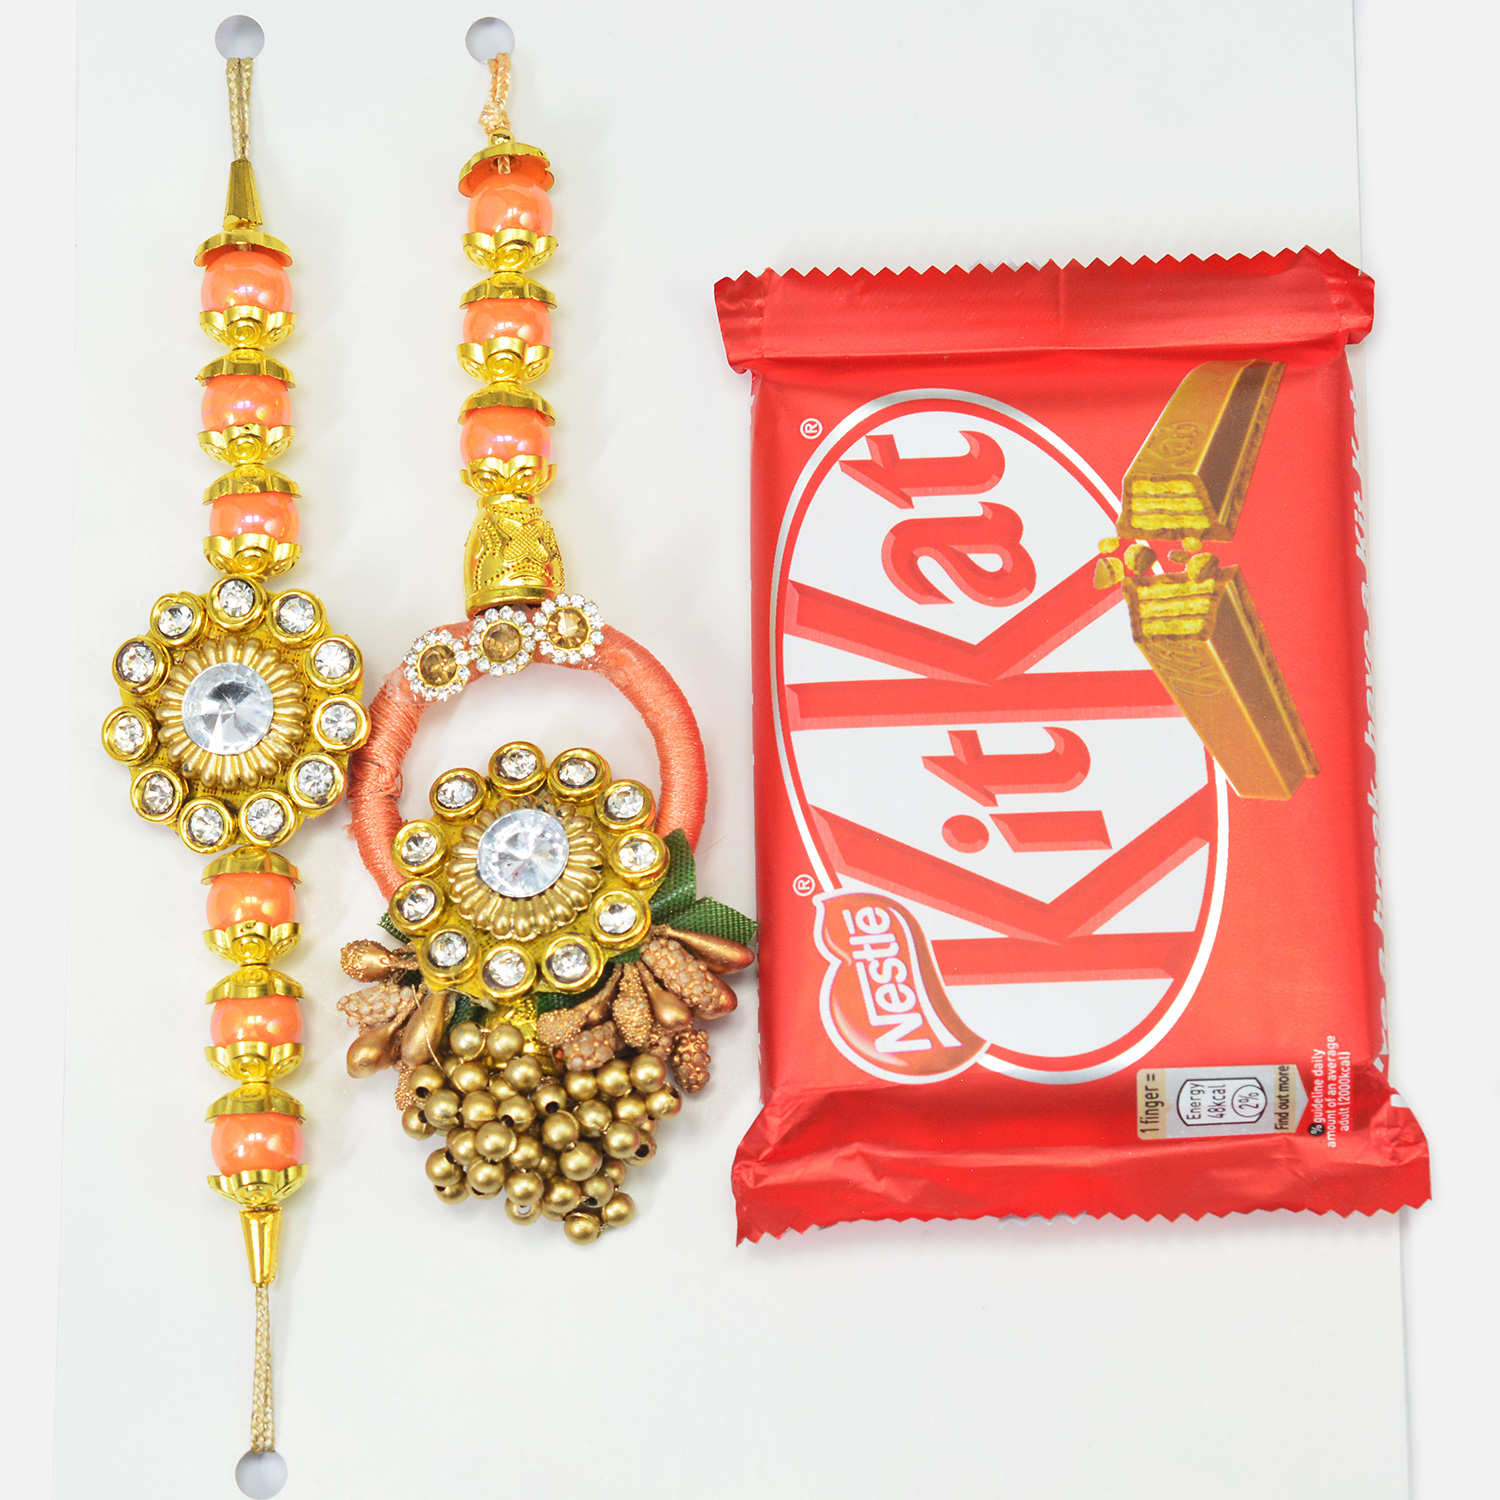 Beaded Lumba and Brother Rakhi with Branded Small Kitkat Chocolate